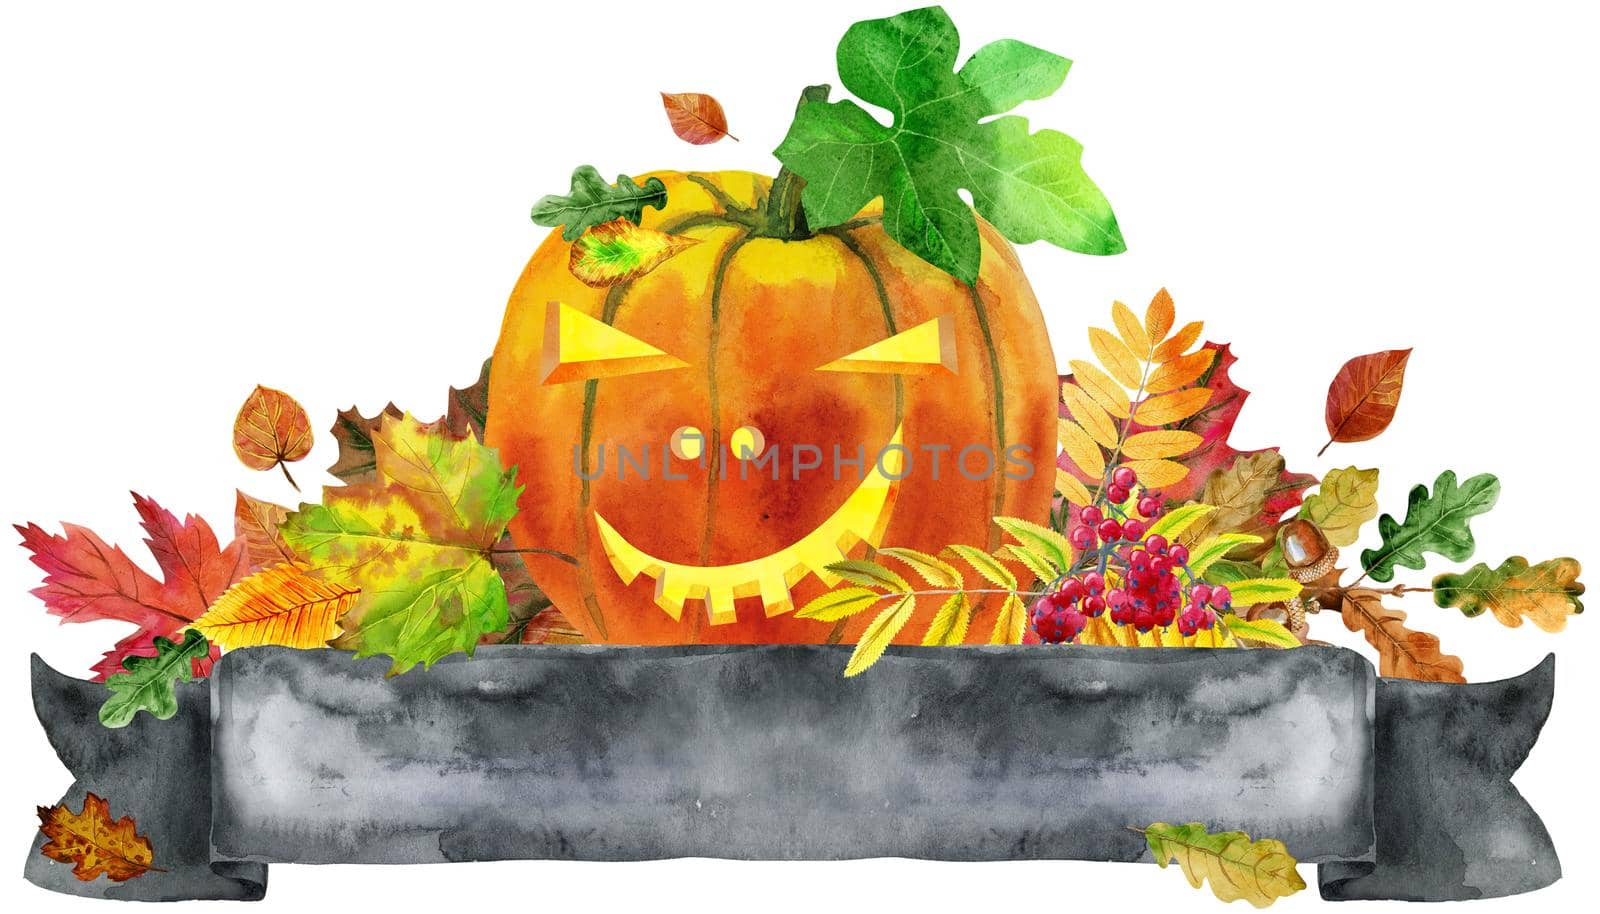 Black banner with red, orange, brown and yellow falling autumn leaves and pumpkin.